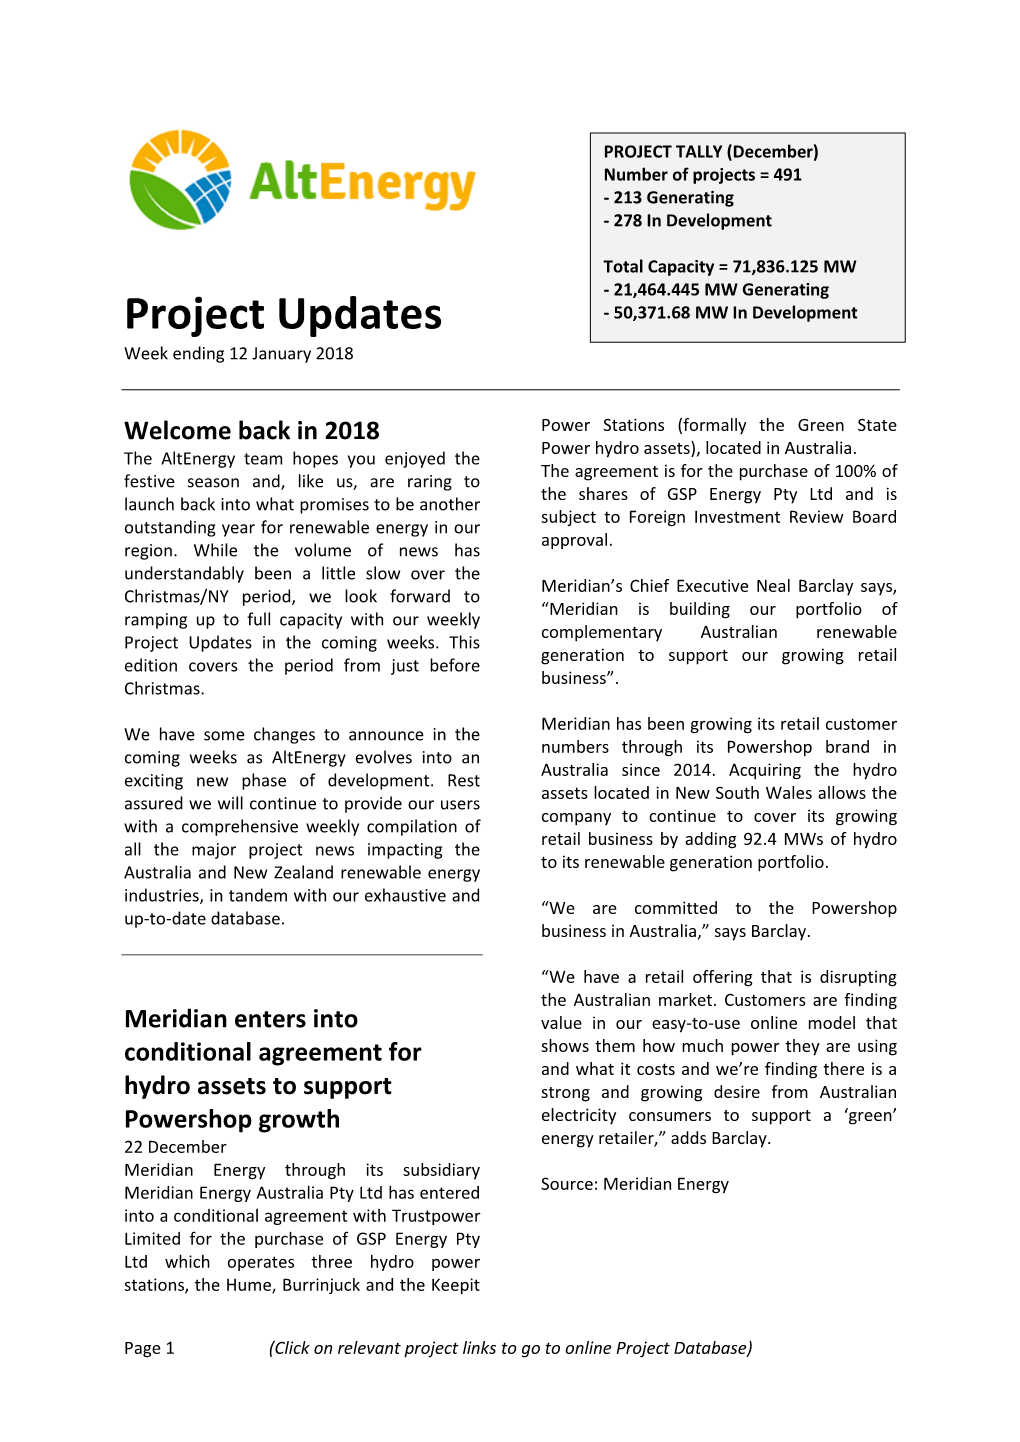 Project Updates Week Ending 12 January 2018